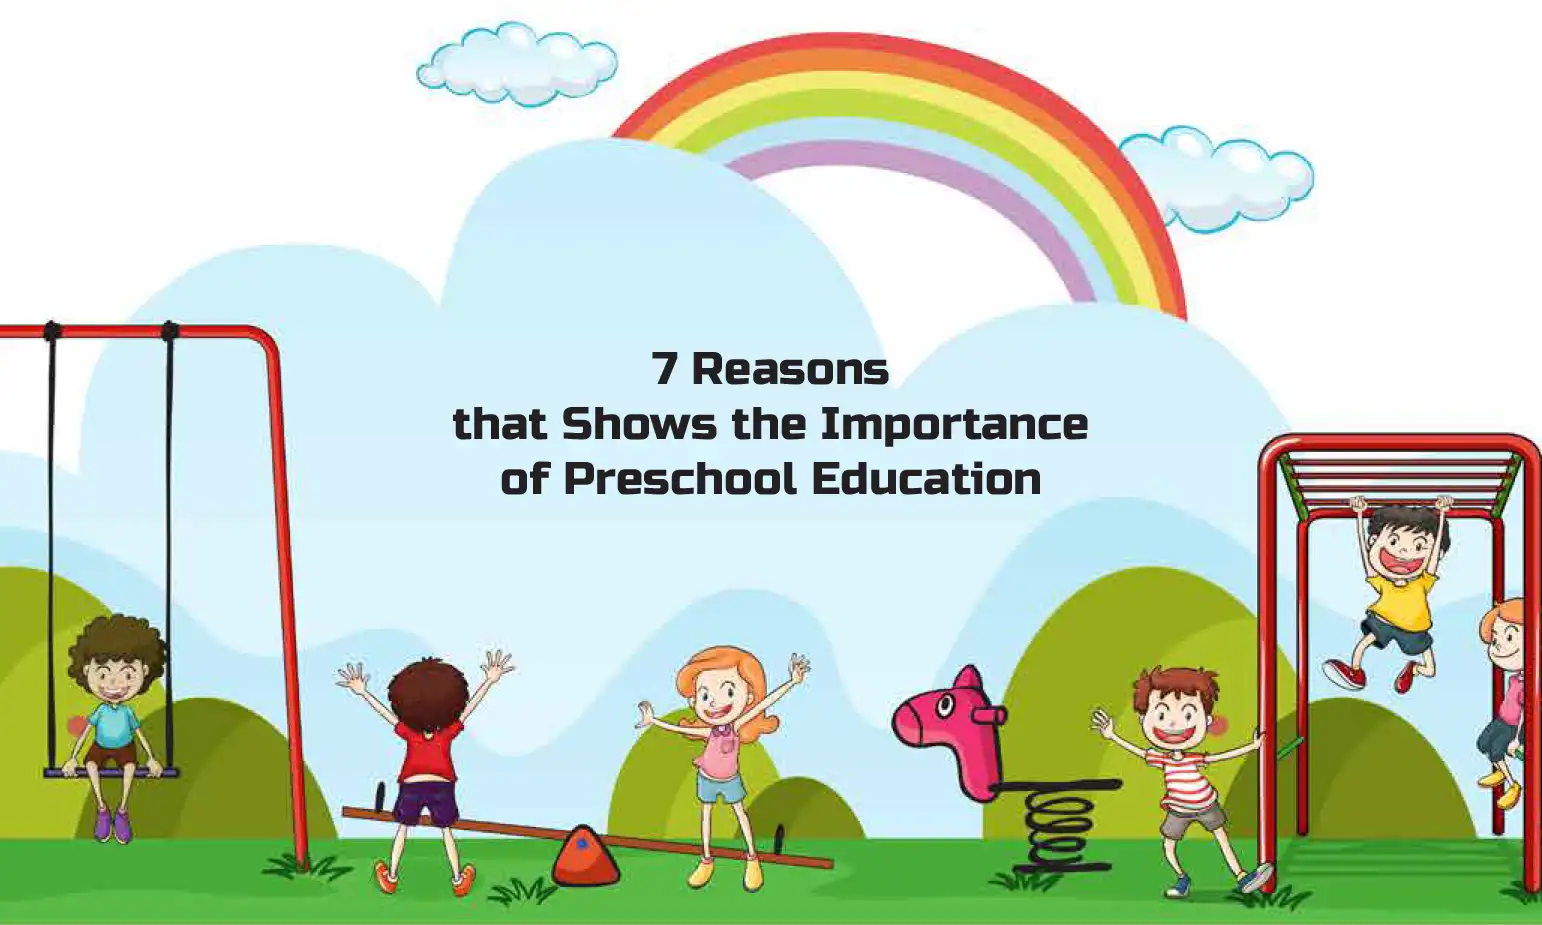 7 Reasons that Shows the Importance of Preschool Education